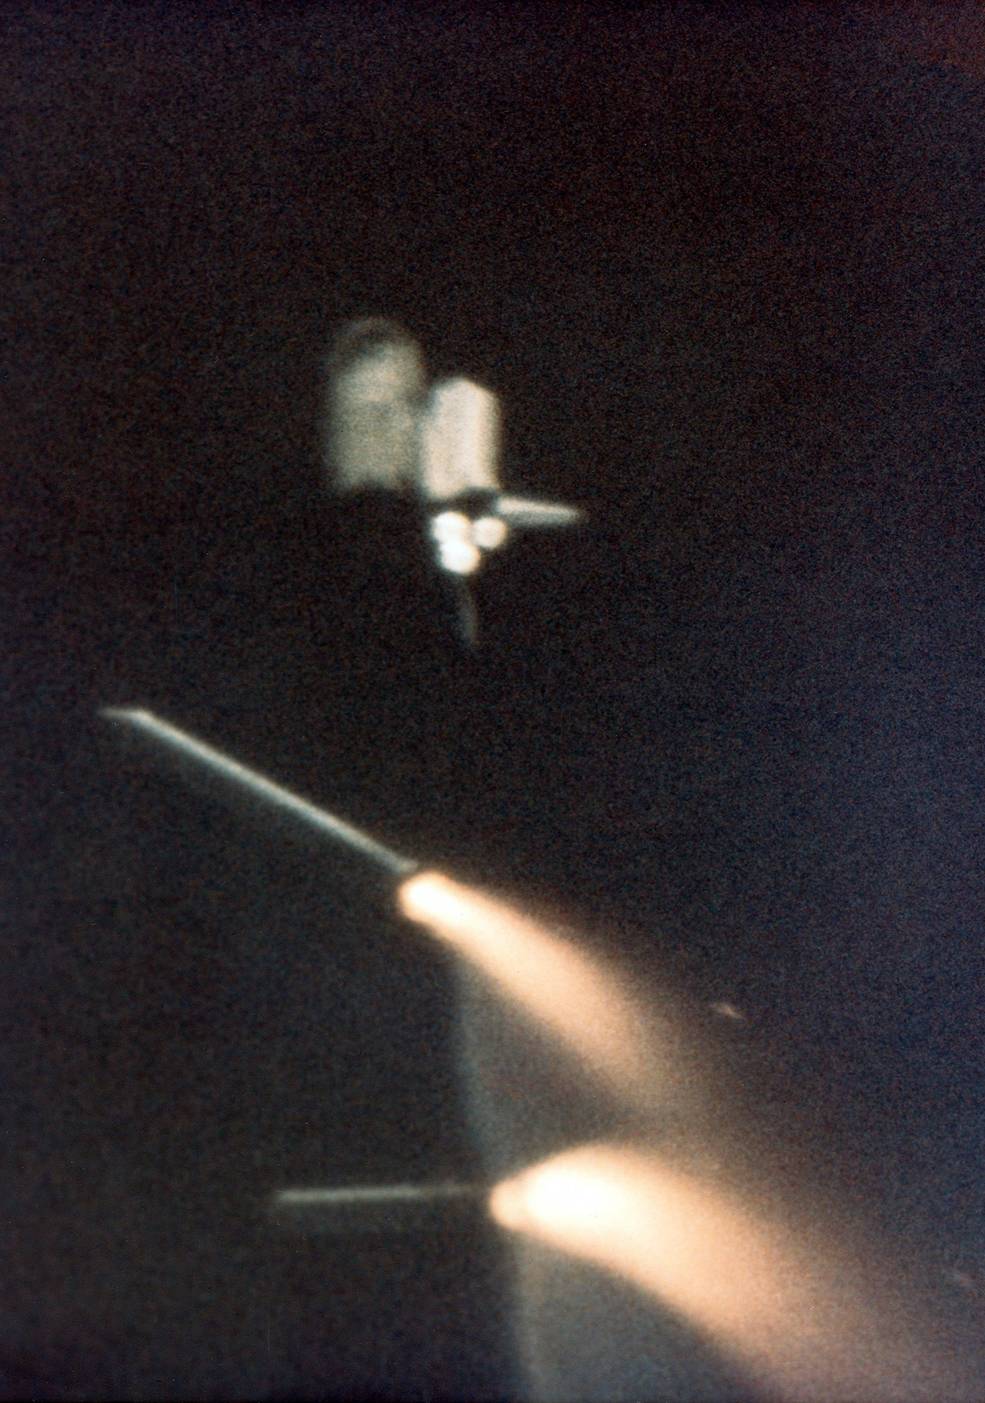 sts-1_launch_18_sts1-1010-s81-33179-4.12.71